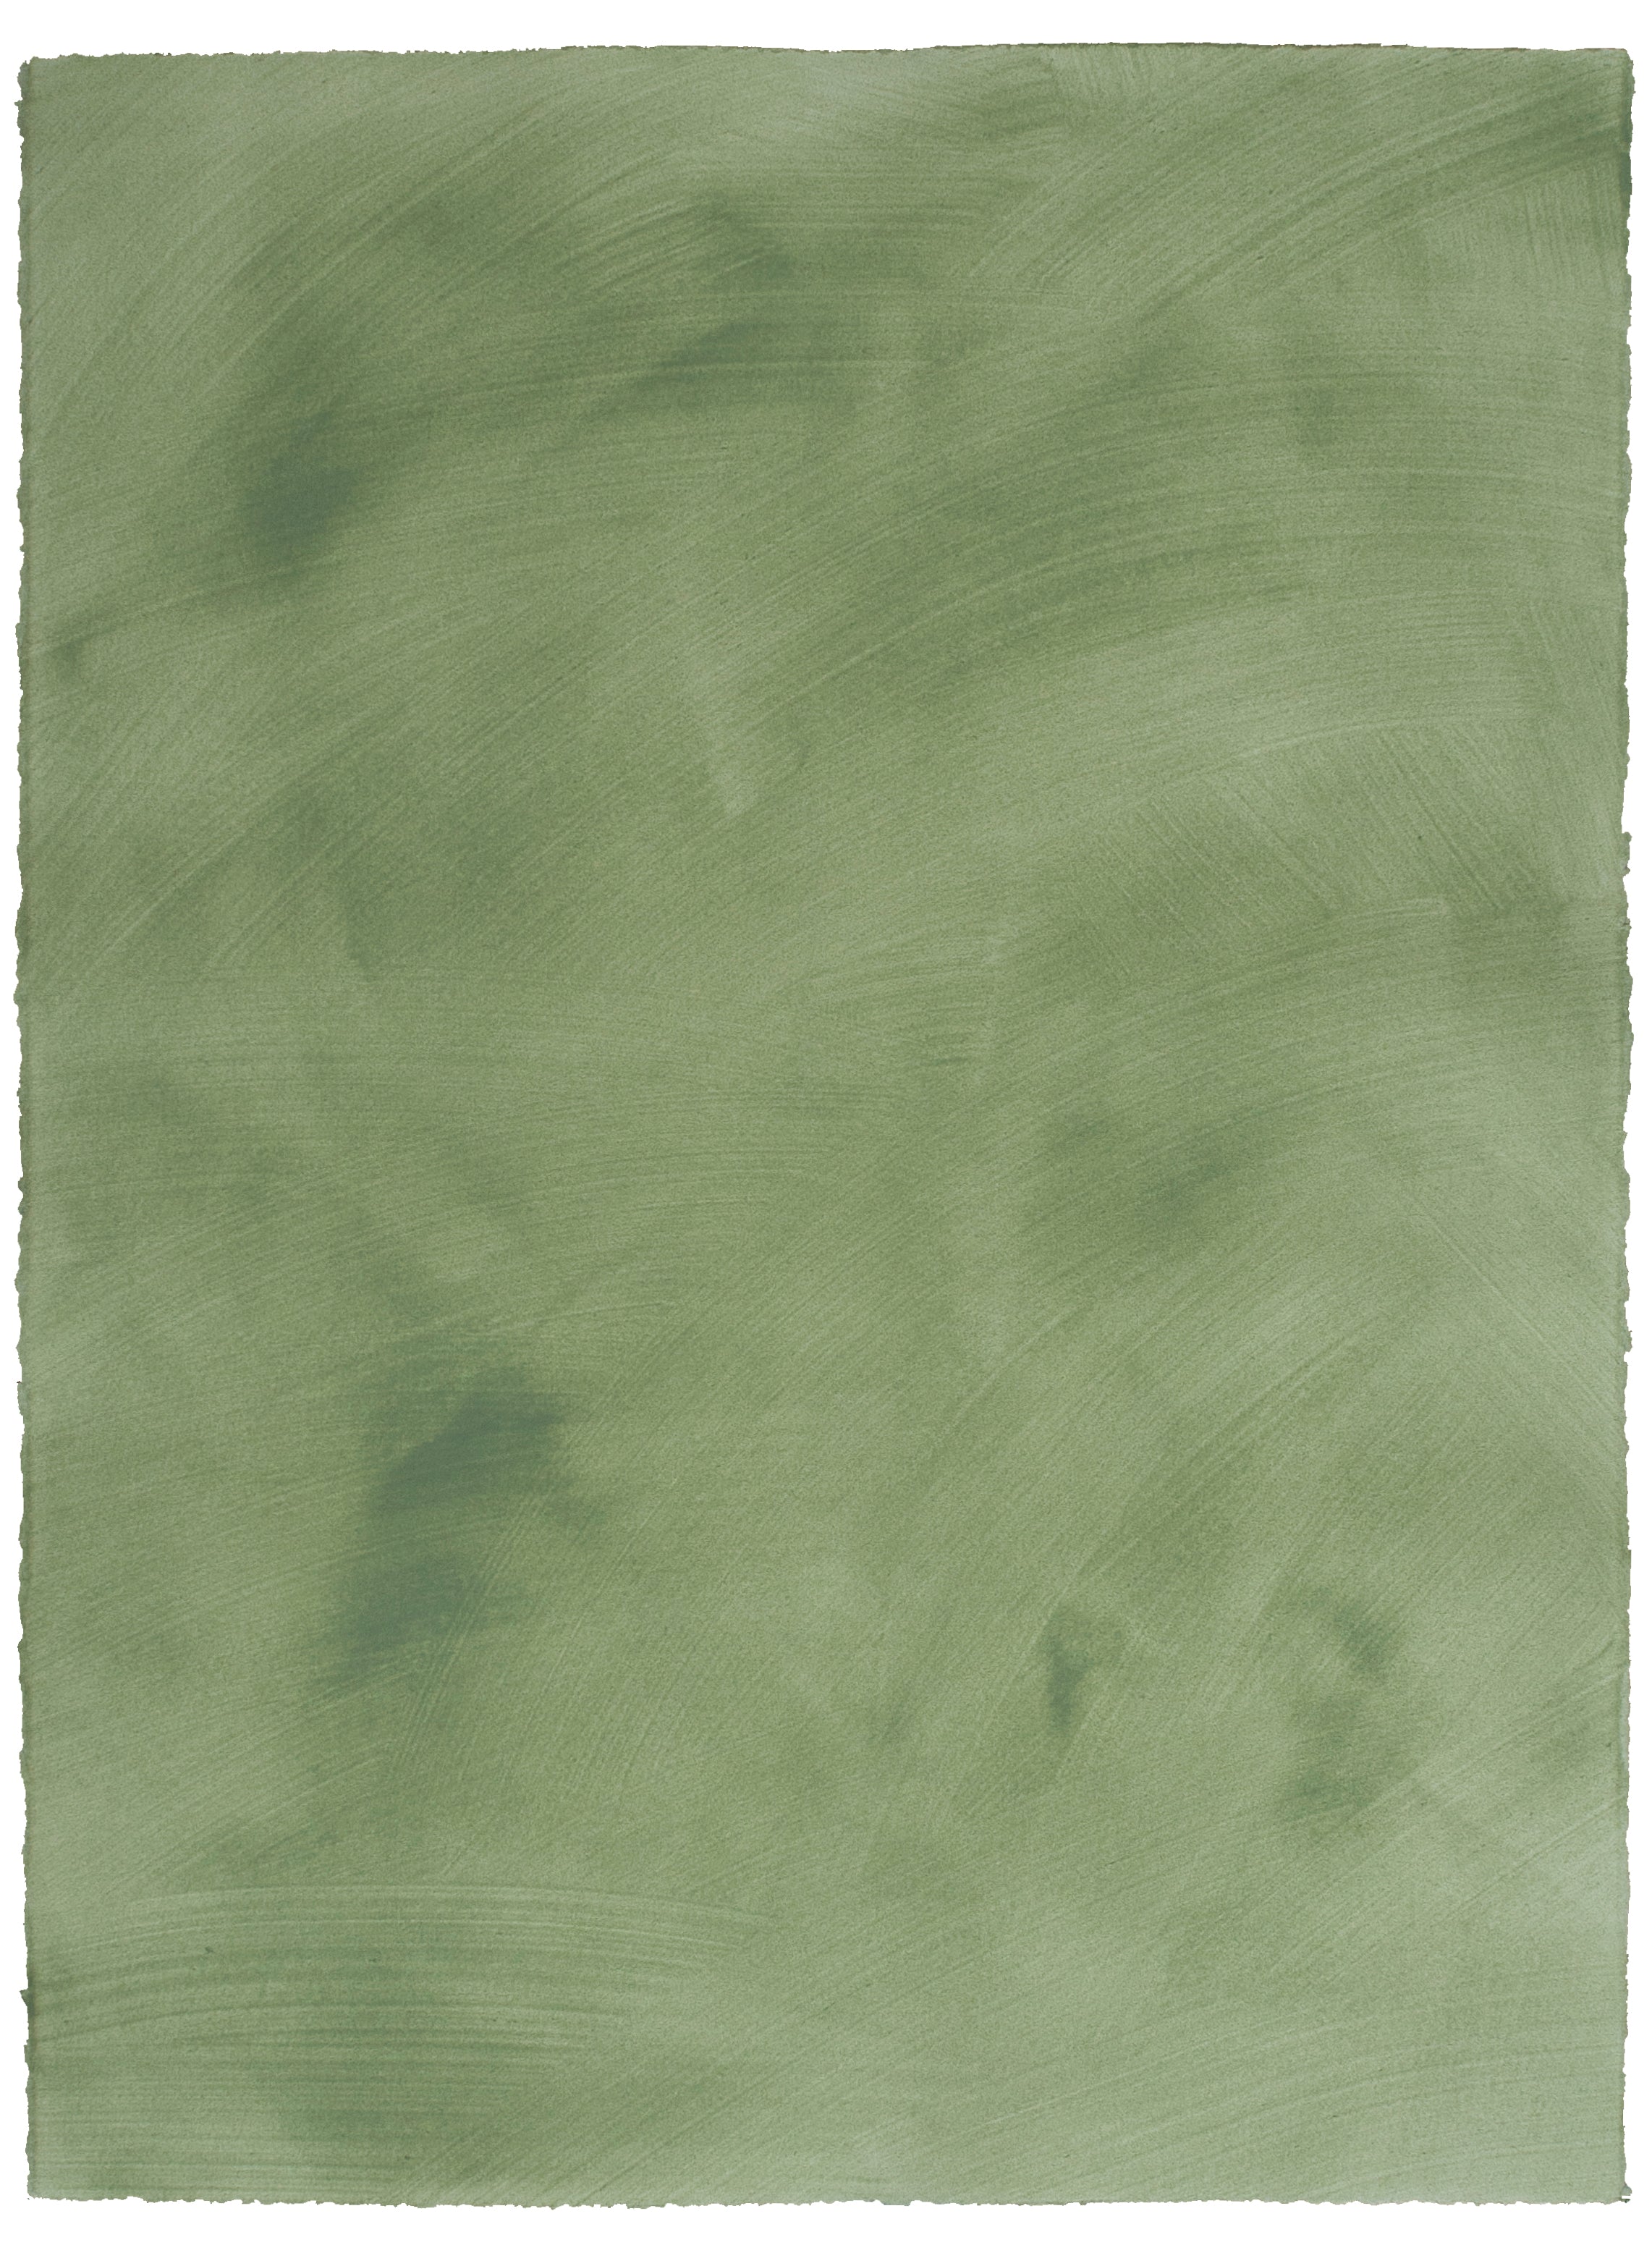 Sheet of hand-painted wallpaper in olive with an irregular brushed texture.